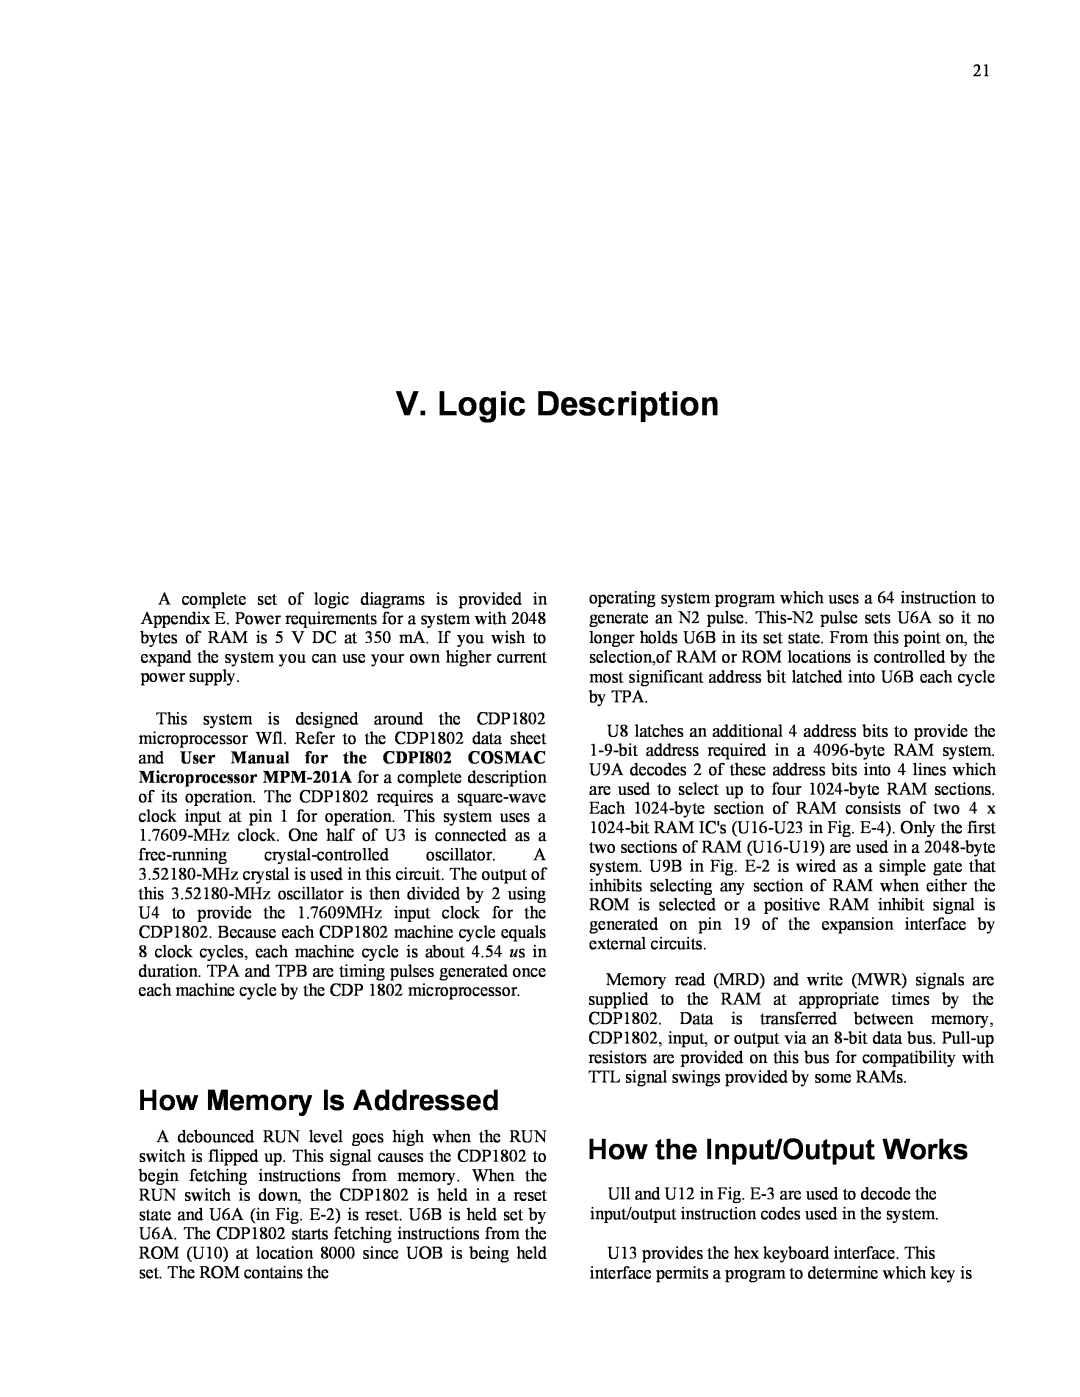 RCA CDP18S711 manual V. Logic Description, How Memory Is Addressed, How the Input/Output Works 